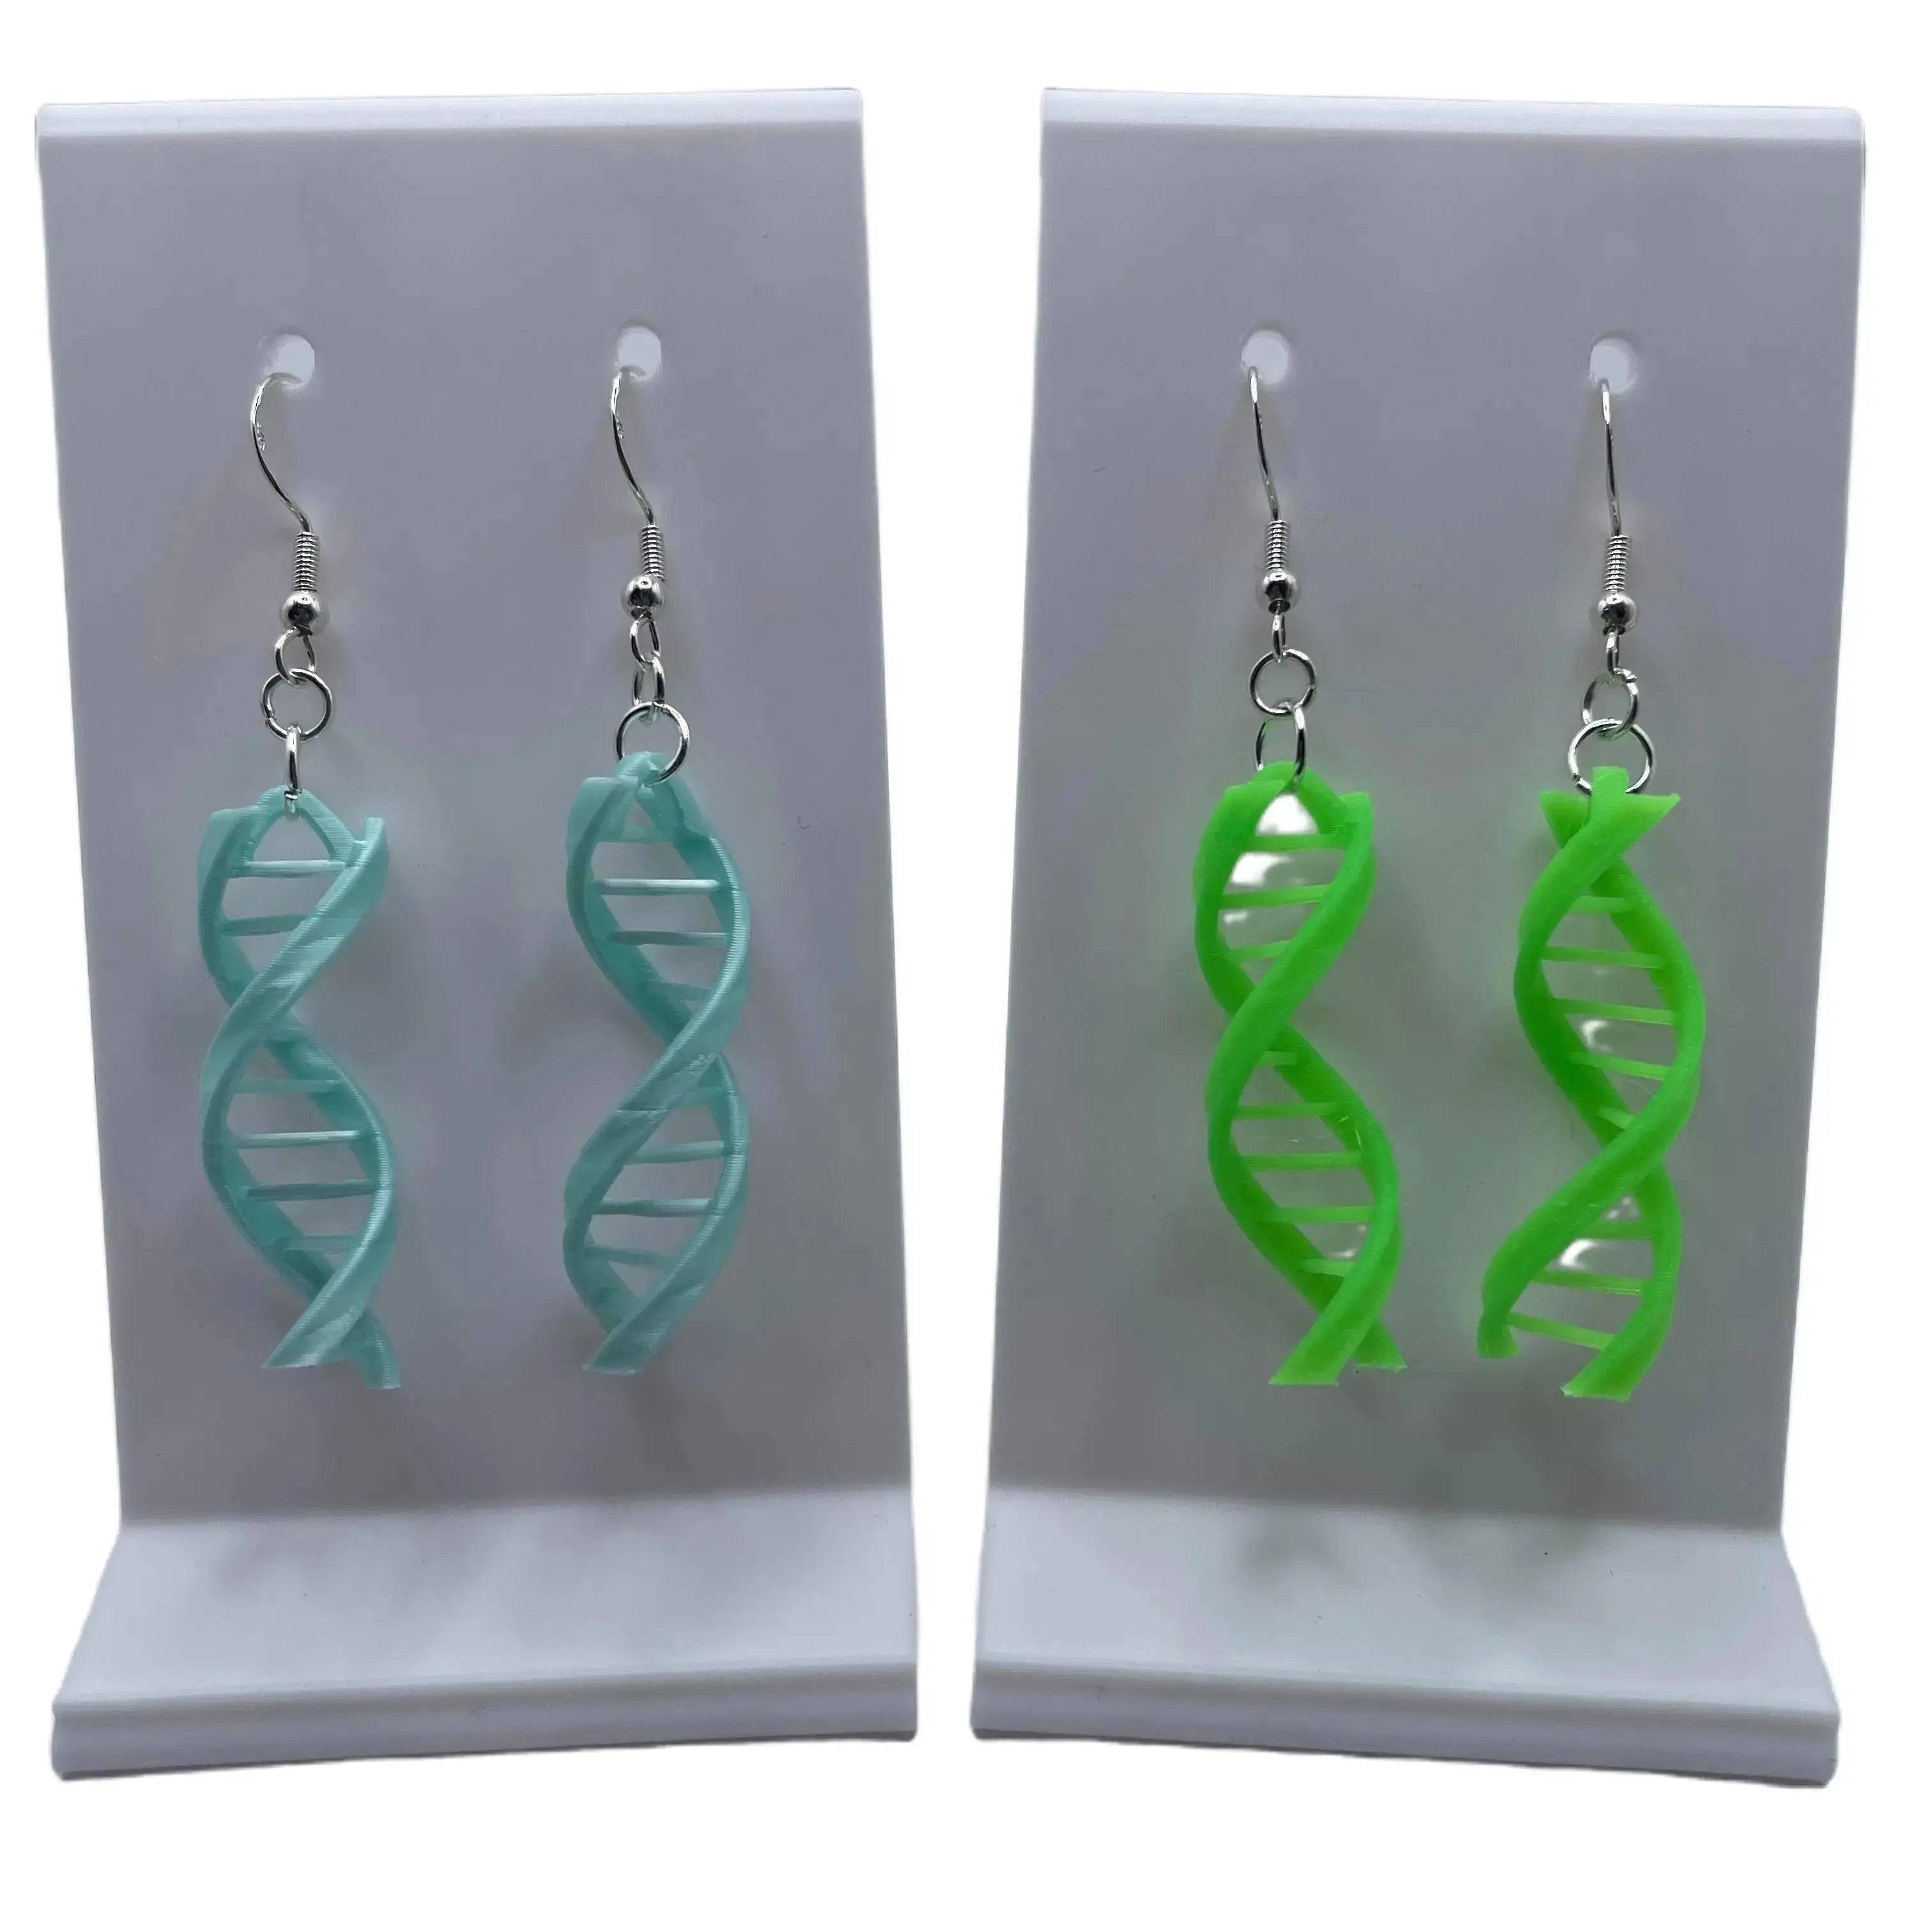 Double Helix DNA Dangle Earrings hang and dangle perfectly and are biodegradable.